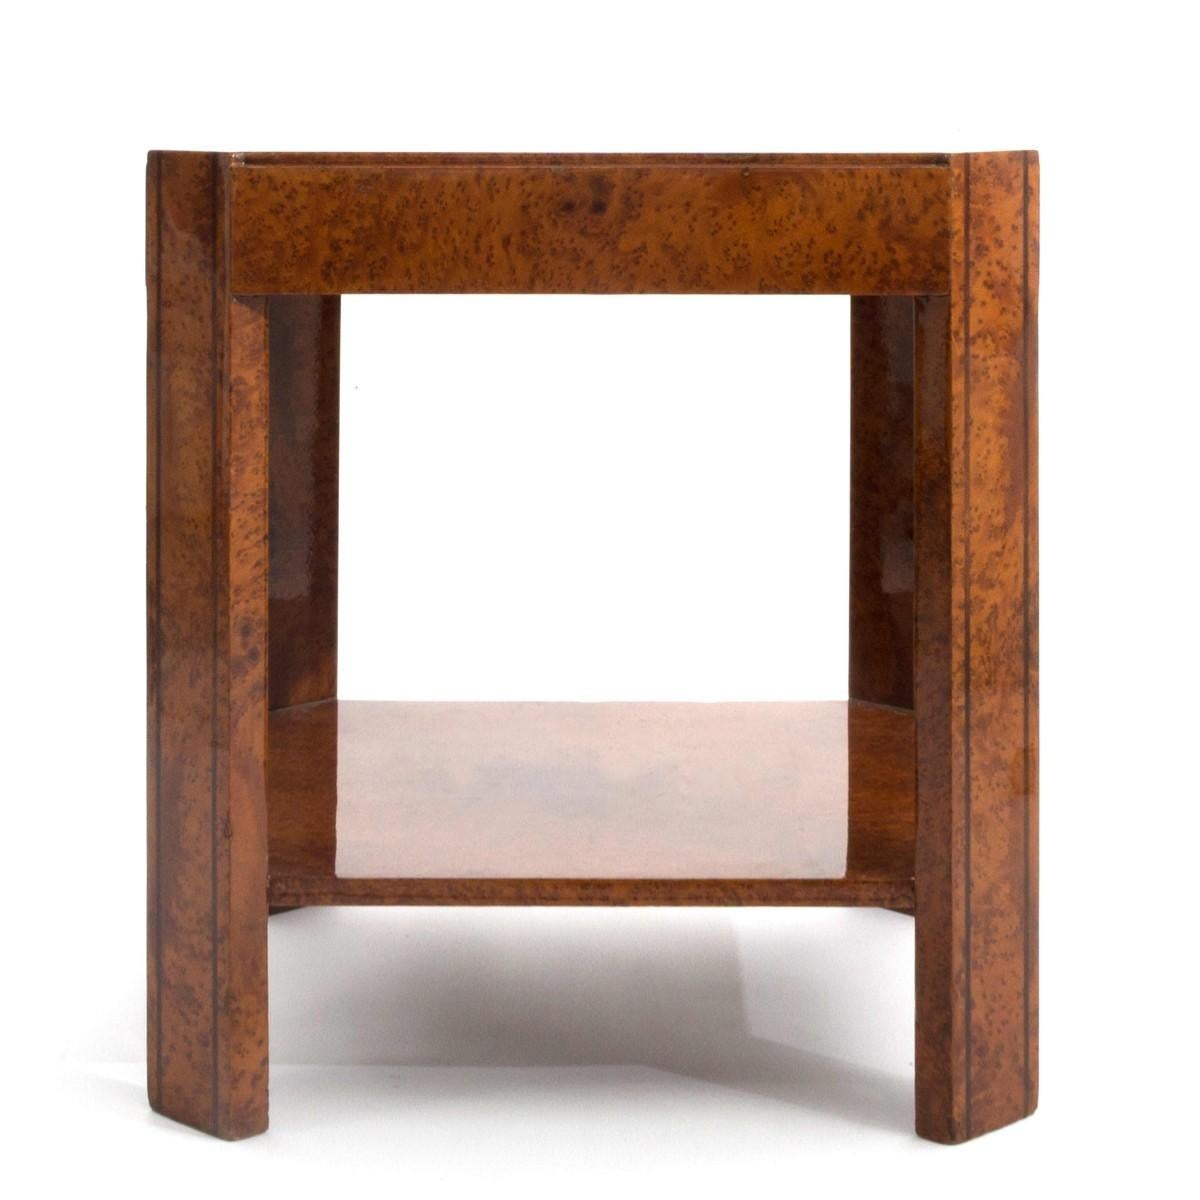 A versatile single Art Deco burl wood side / end table with Macassar banding, French, circa 1940.

Features a square top with cut corners. The 24 inch height makes it ideal for placement next to most sofas.

Dimensions: 22.0 inches L x 22 inches